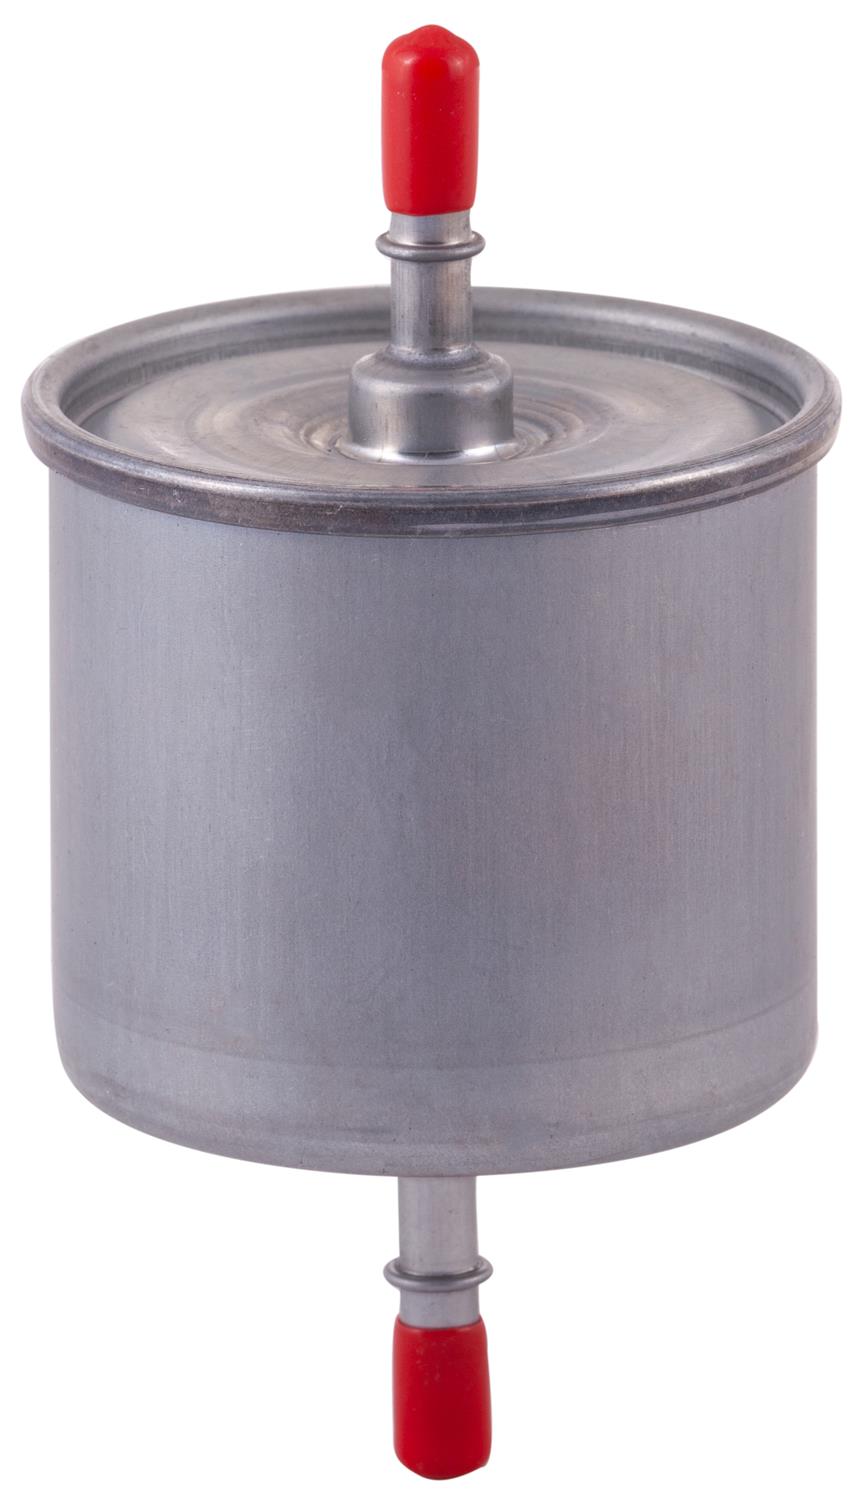 1988 Ford Bronco Fuel Filter  PF3802